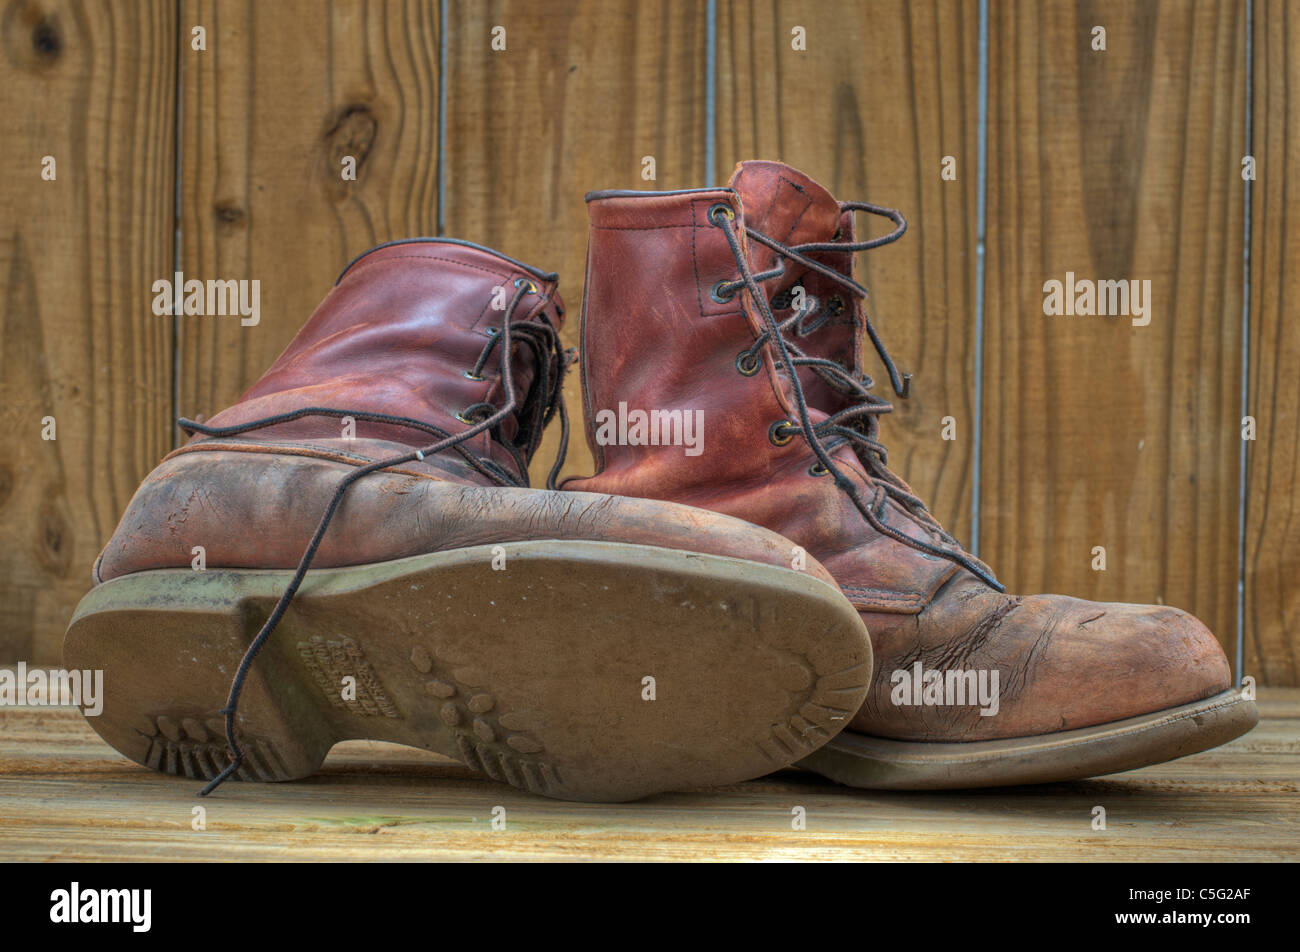 Red Wing leather work Boots Stock Photo